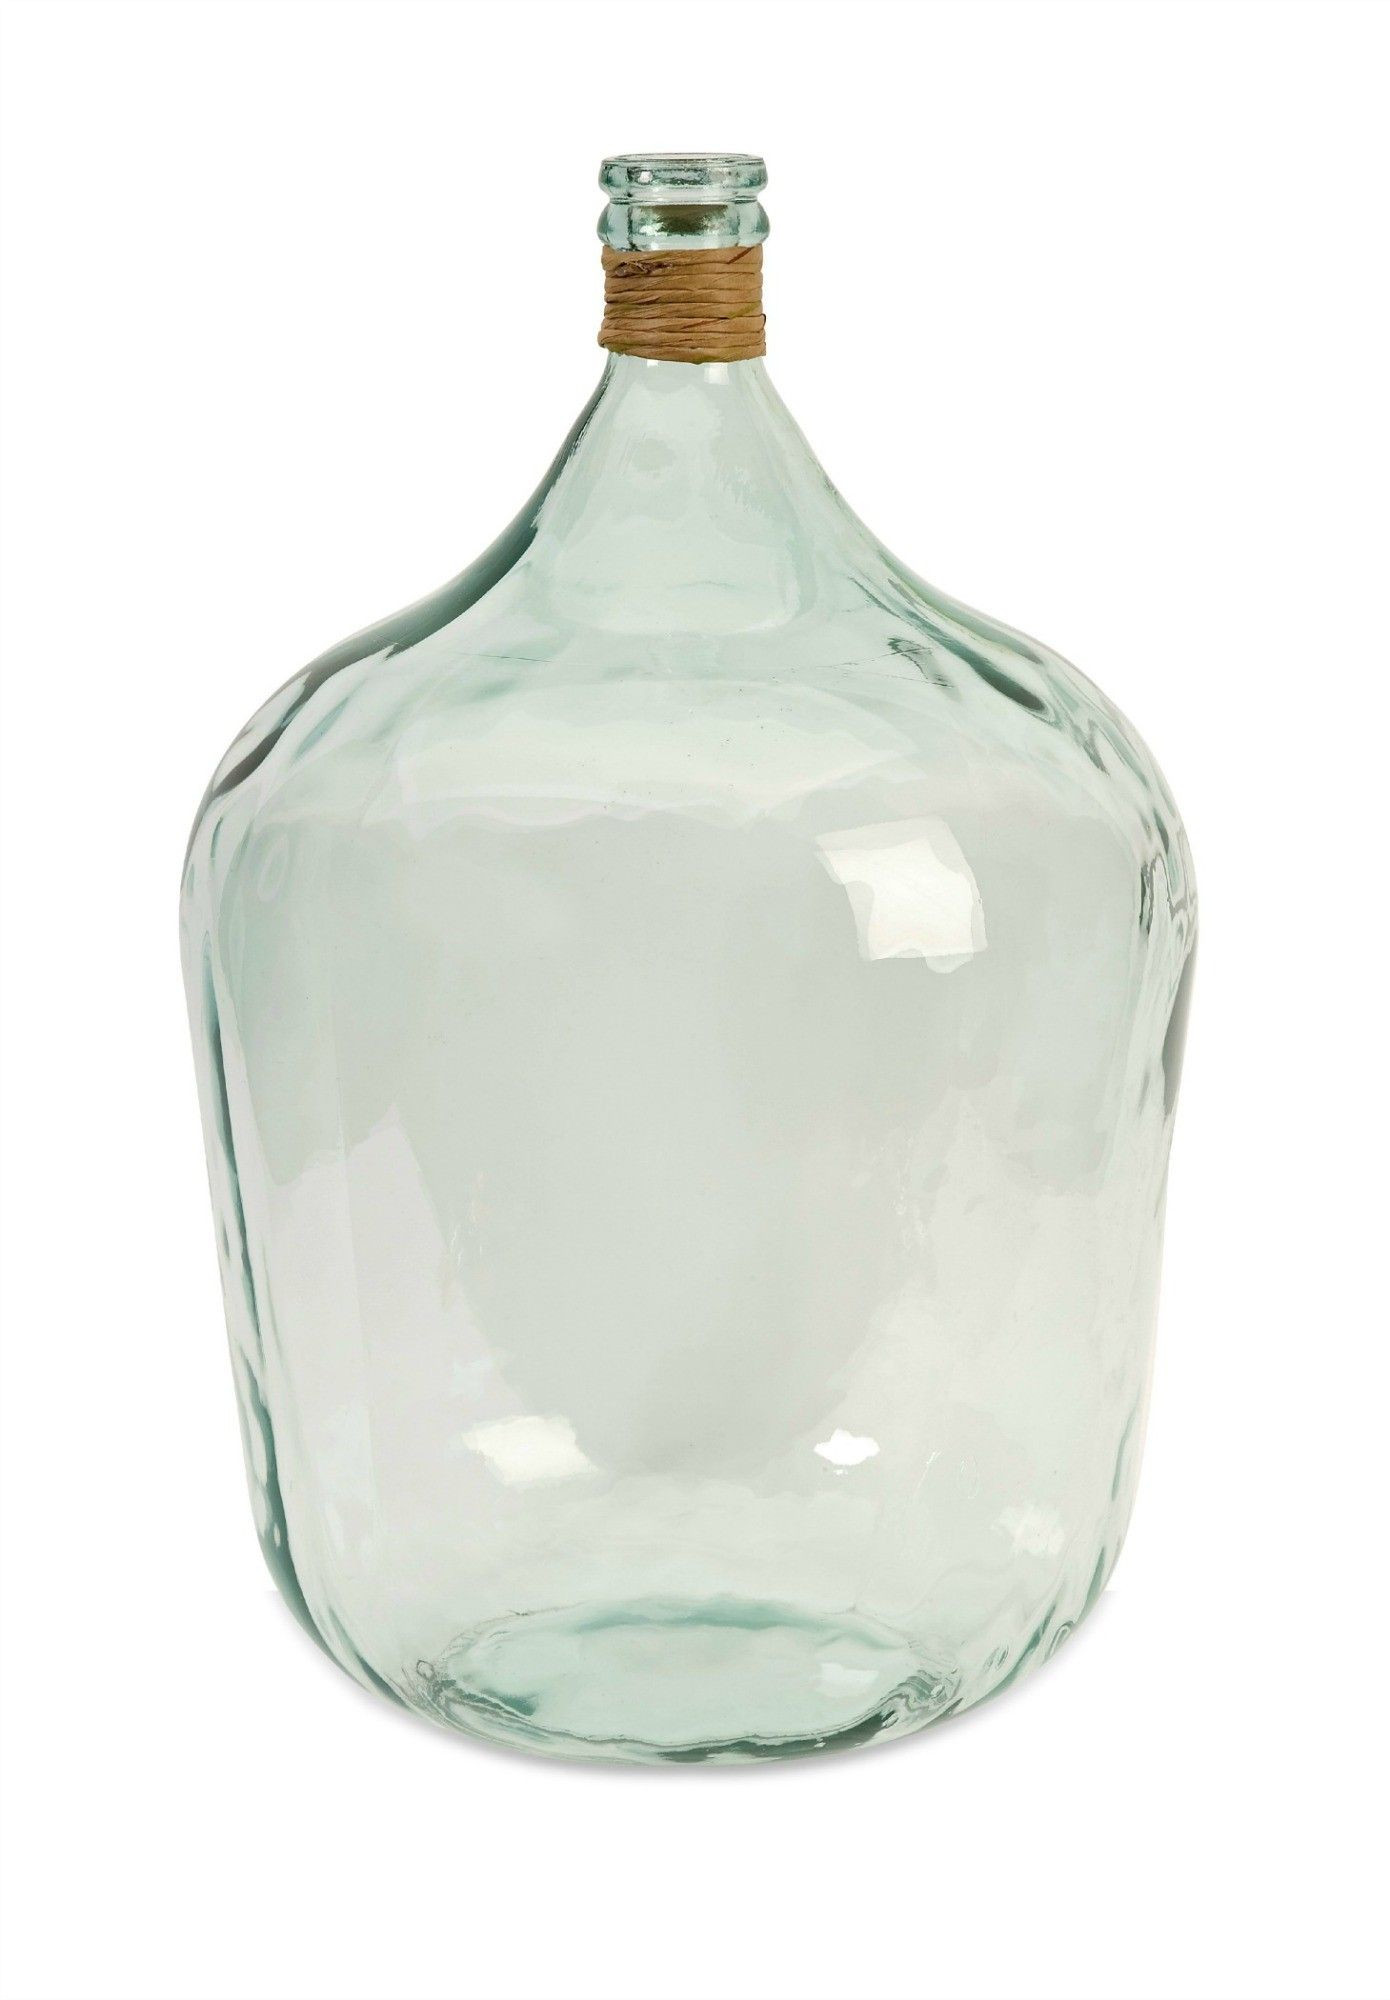 26 Nice Large Decorative Clear Glass Vases 2024 free download large decorative clear glass vases of boccioni large recycled glass jug would be pretty filled with for boccioni large recycled glass jug would be pretty filled with beach glass finds